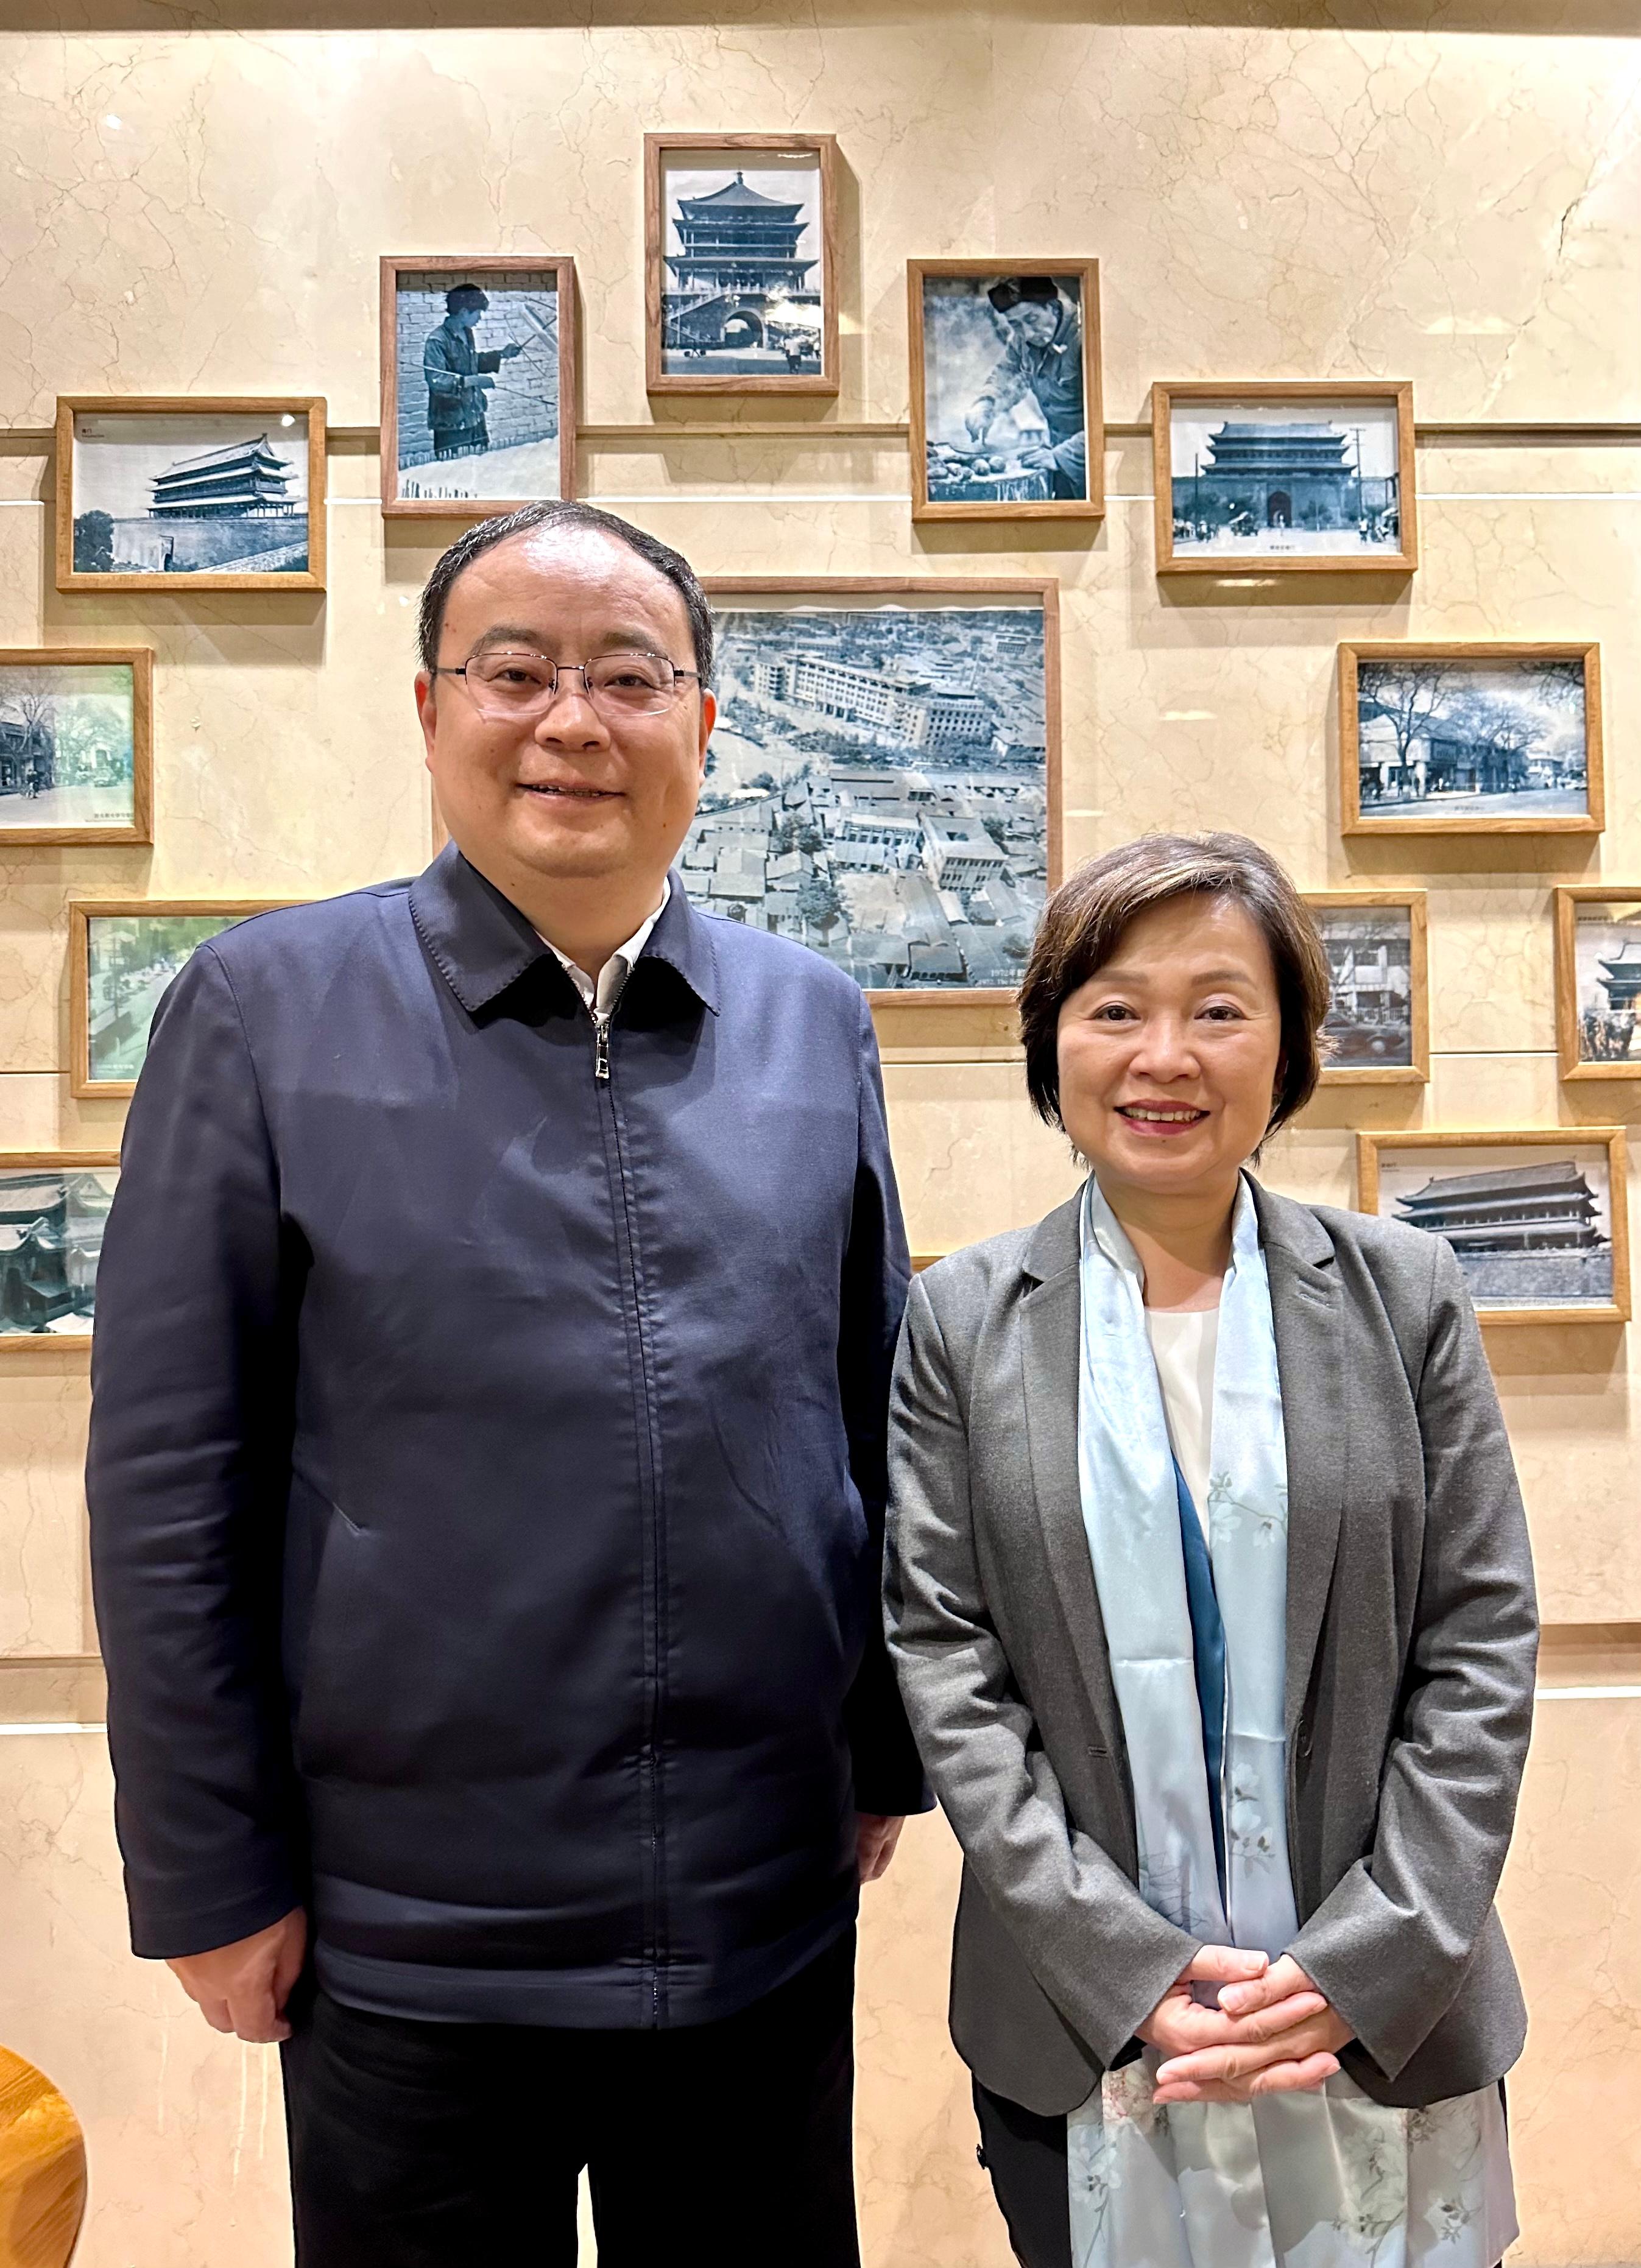 The Secretary for Education, Dr Choi Yuk-lin (right), meets the Director-General of the Department of Education of Shaanxi Province, Mr Wang Shusheng (left) in Xi'an today (April 1).